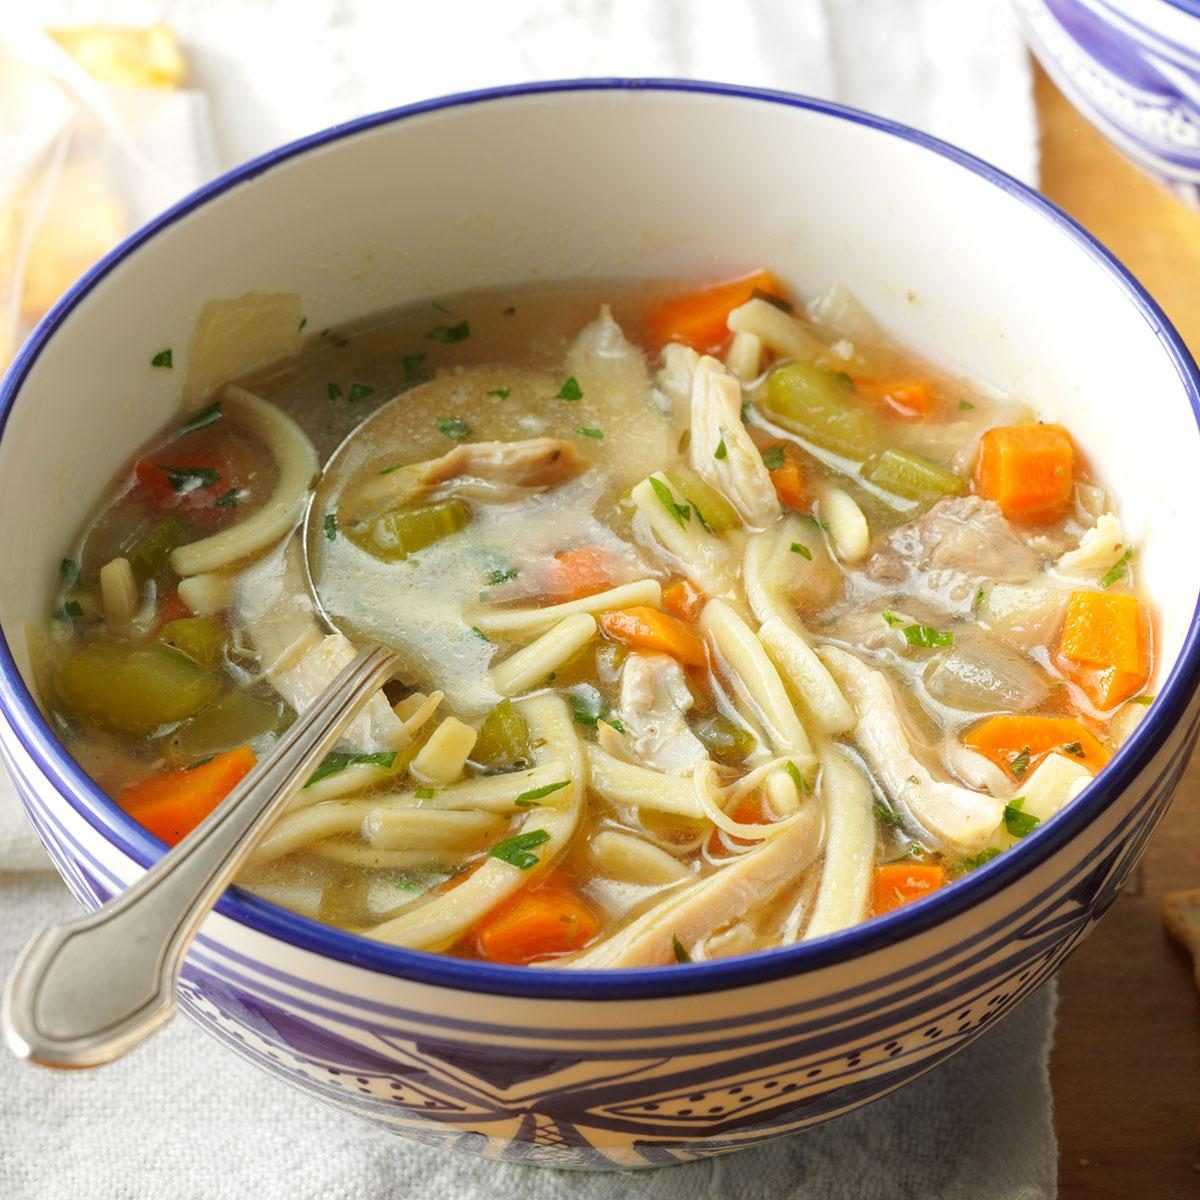 Everyone makes chicken noodle soup a little differently, but the base of most recipes starts with celery, carrots and onions with roasted chicken and egg noodles in a hearty chicken broth. Herbs like basil, oregano, thyme or rosemary and garlic are often added to recipes for extra flavor. <a href="https://www.tasteofhome.com/recipes/the-ultimate-chicken-noodle-soup/">Get Recipe</a>